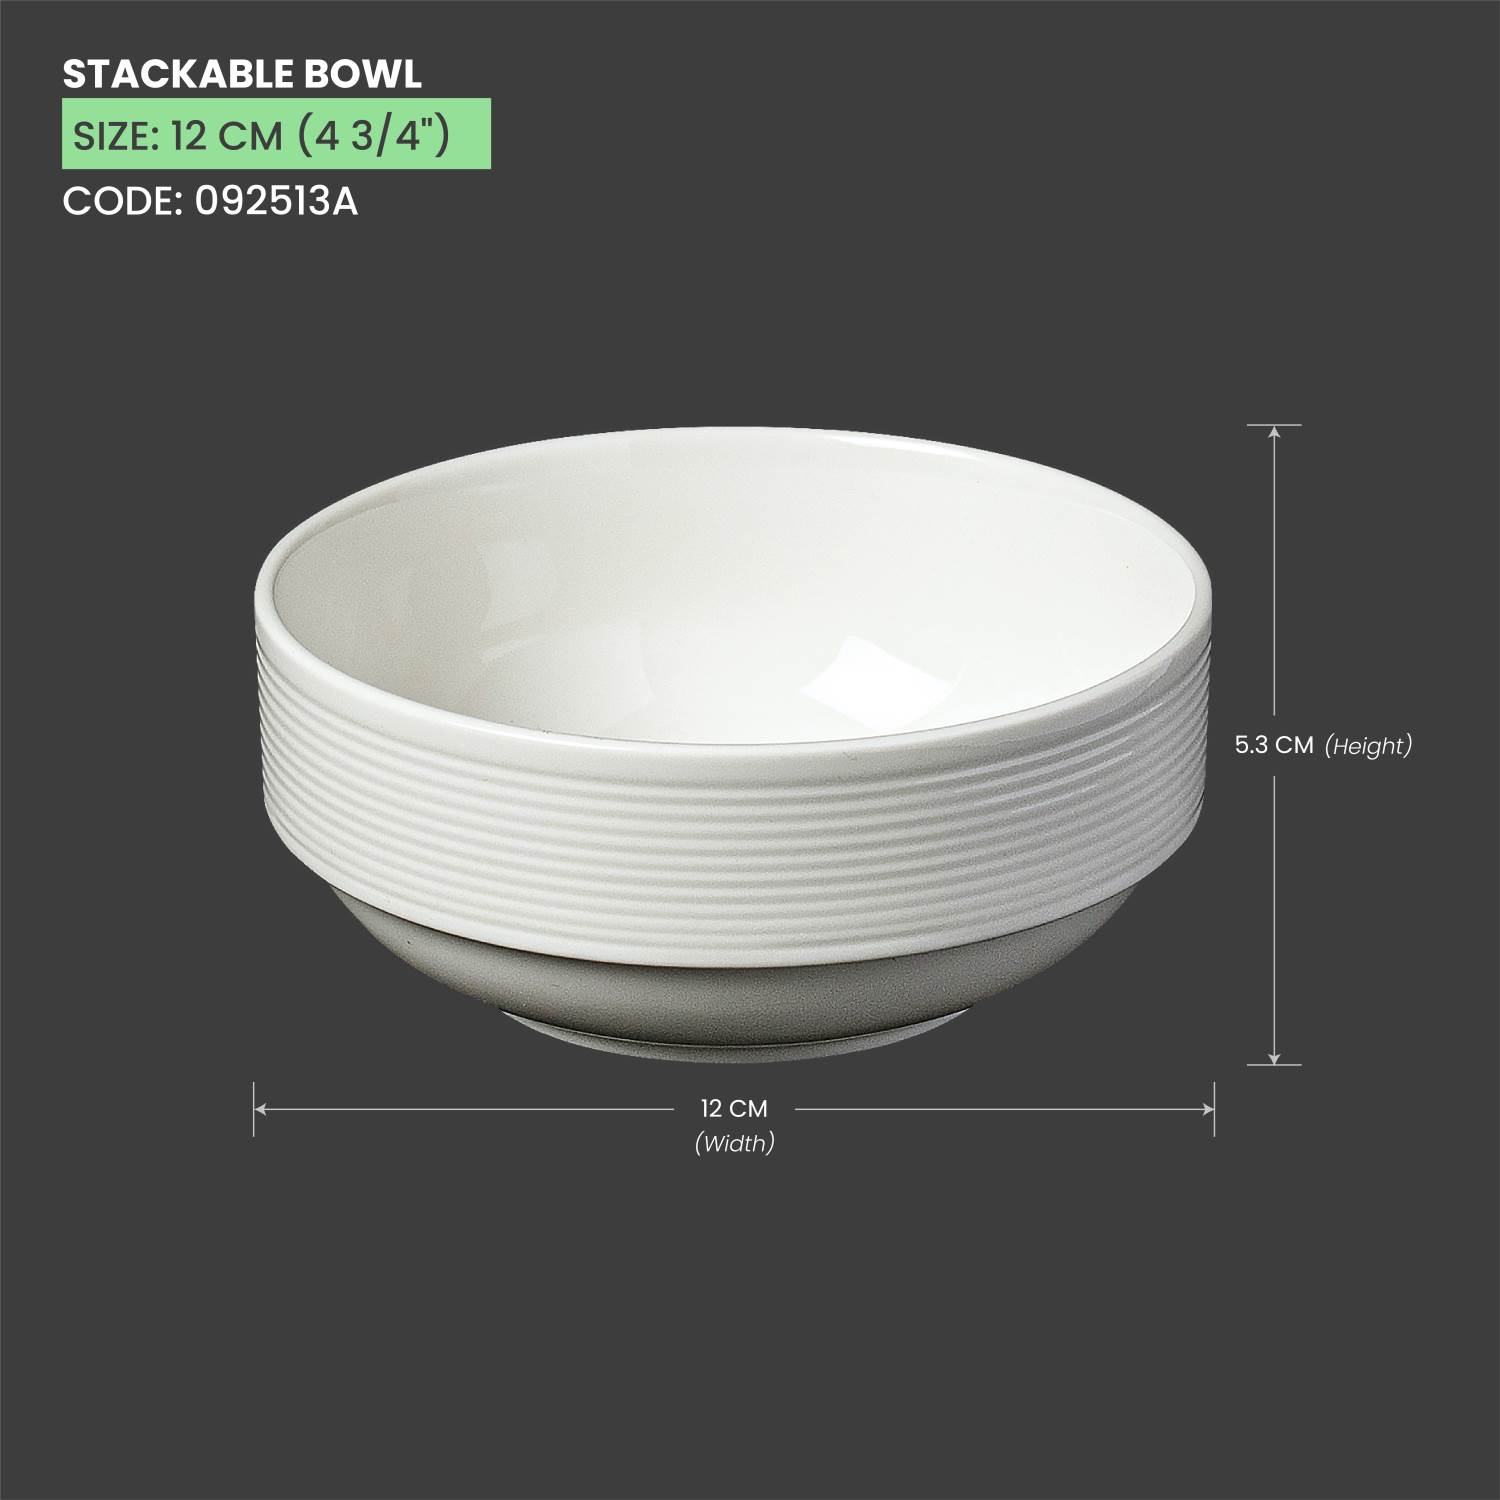 Baralee Wish Stackable Bowl